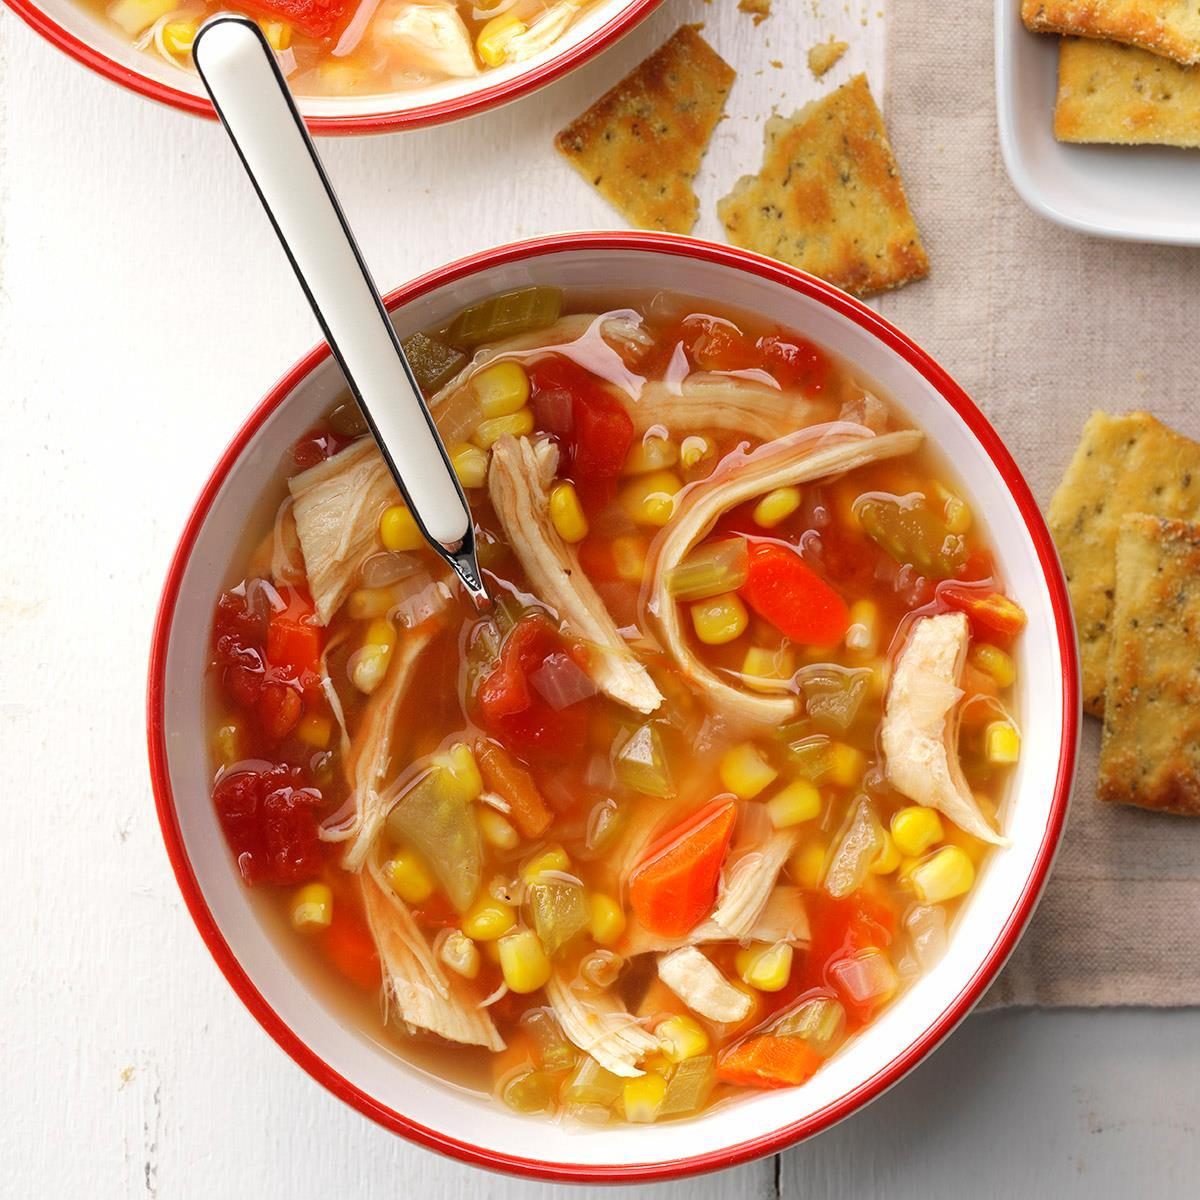 Chicken Vegetable Soup Recipe: How to Make It